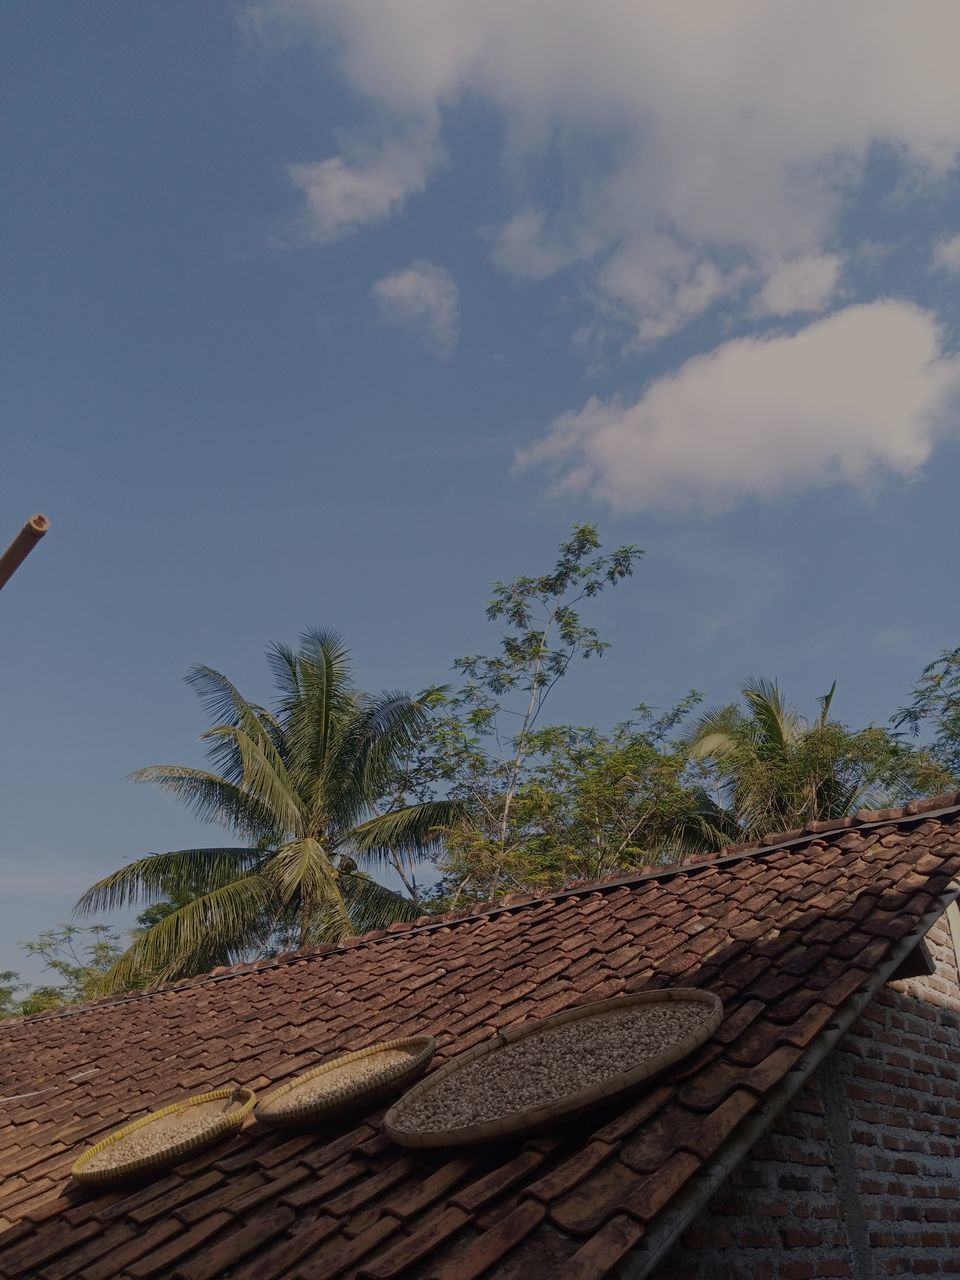 sky, cloud, roof, tree, architecture, roof tile, nature, palm tree, built structure, plant, no people, tropical climate, day, building exterior, sunlight, outdoors, building, house, wall, low angle view